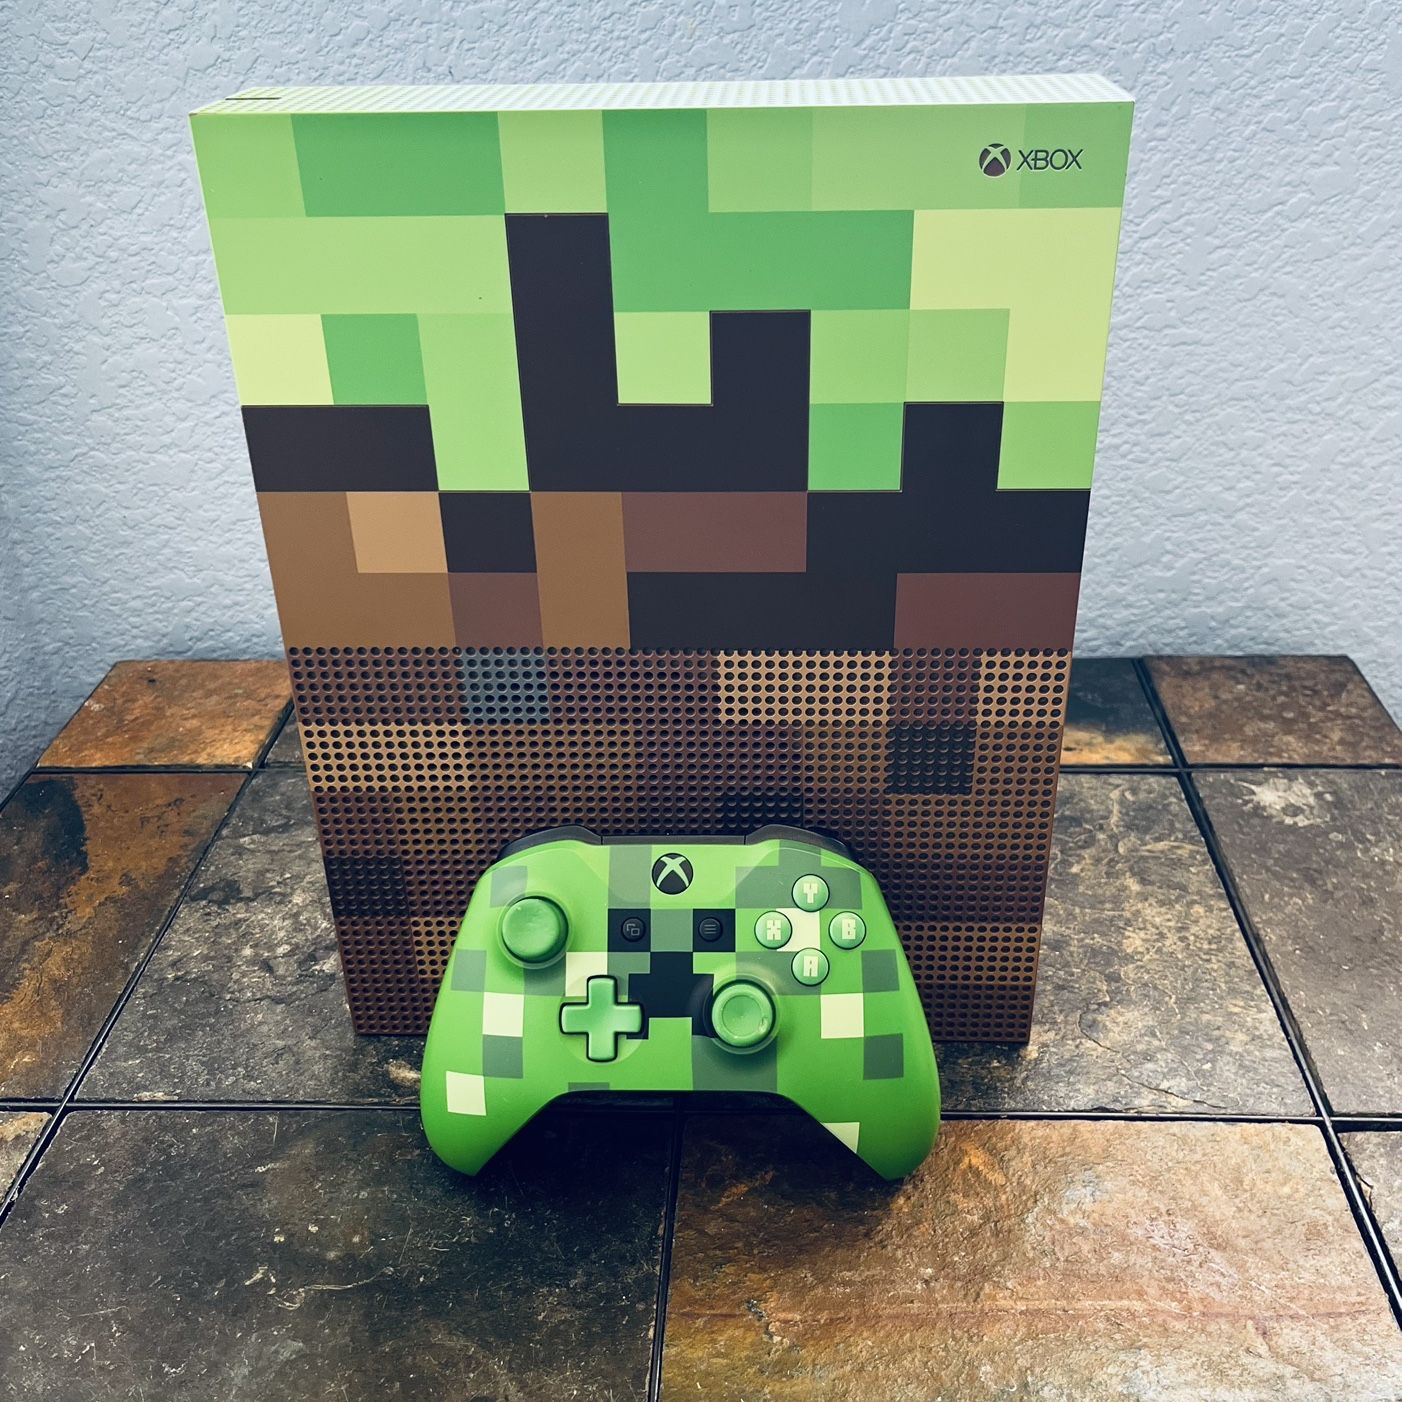 Xbox ONE S MINECRAFT EDITION 780GB Console With Creeper Controller